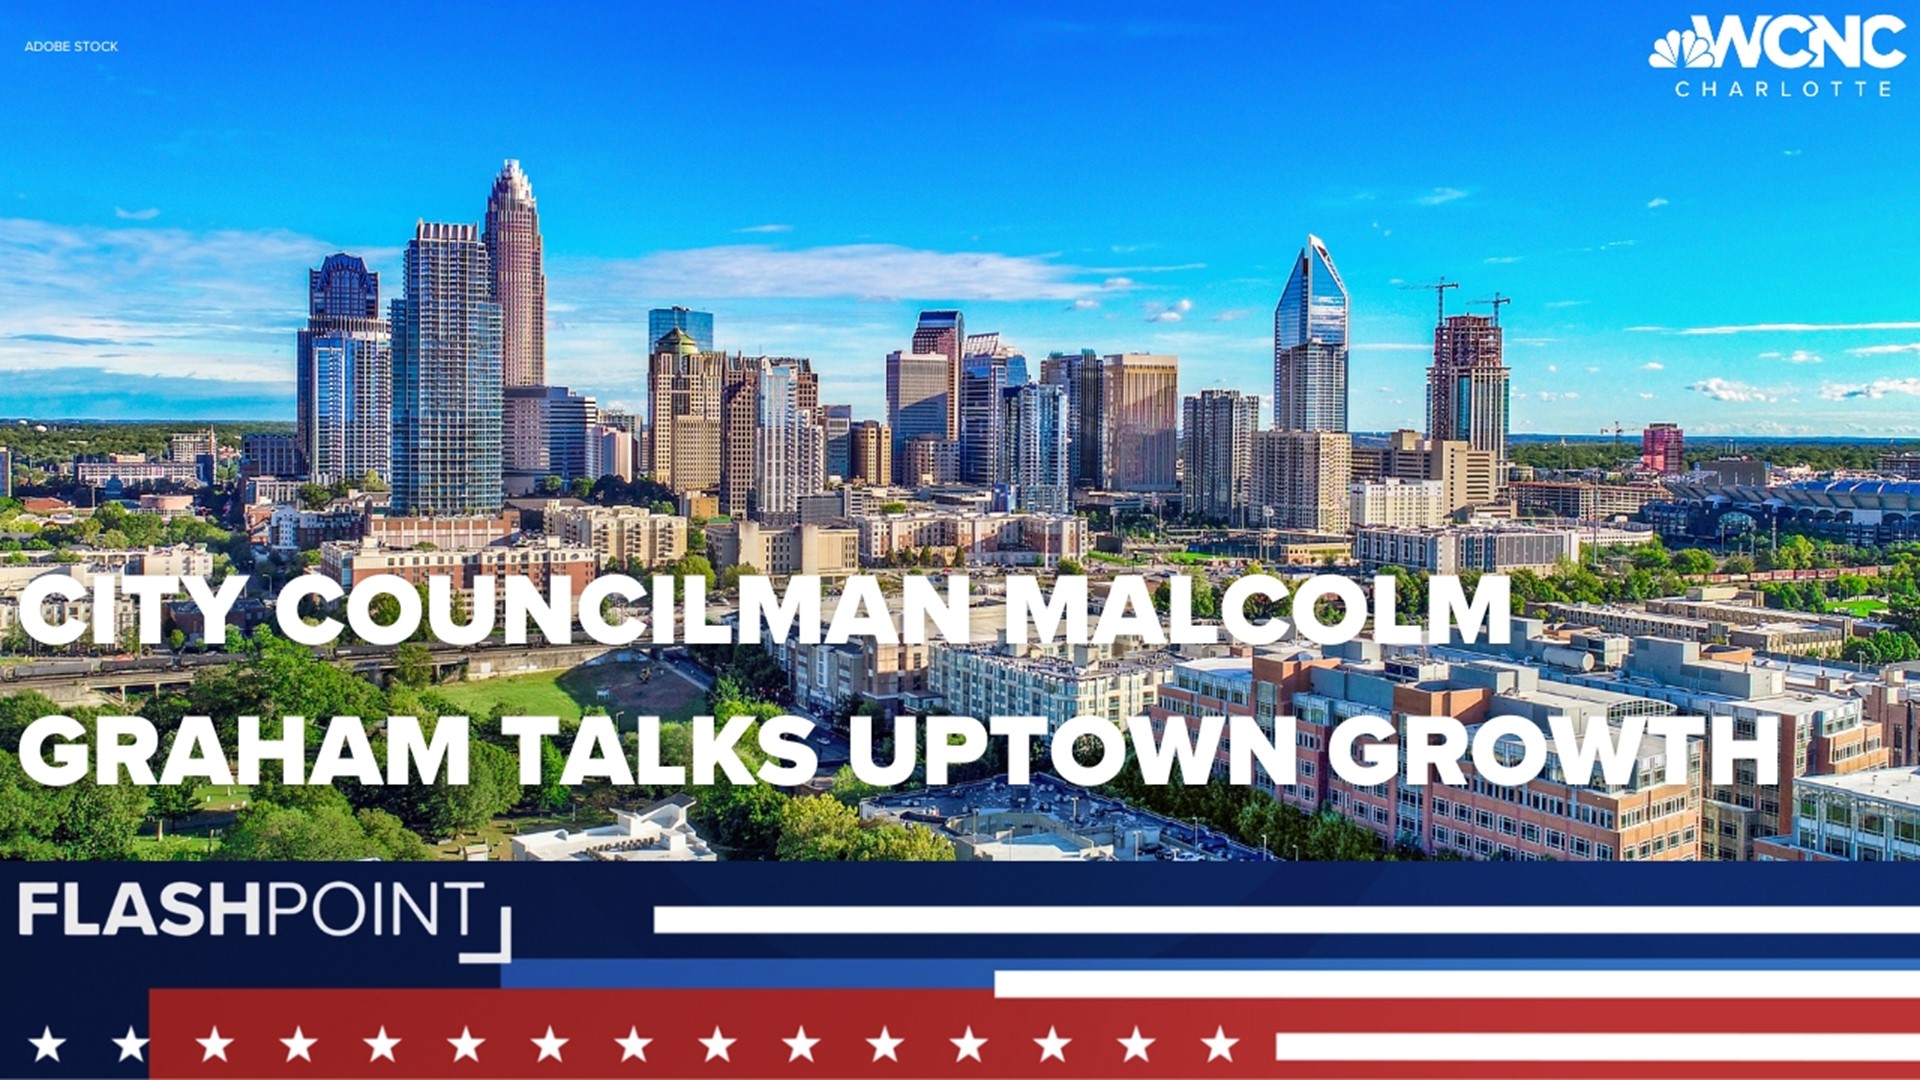 On Flashpoint, Uptown leaders look to the next decade of growth.